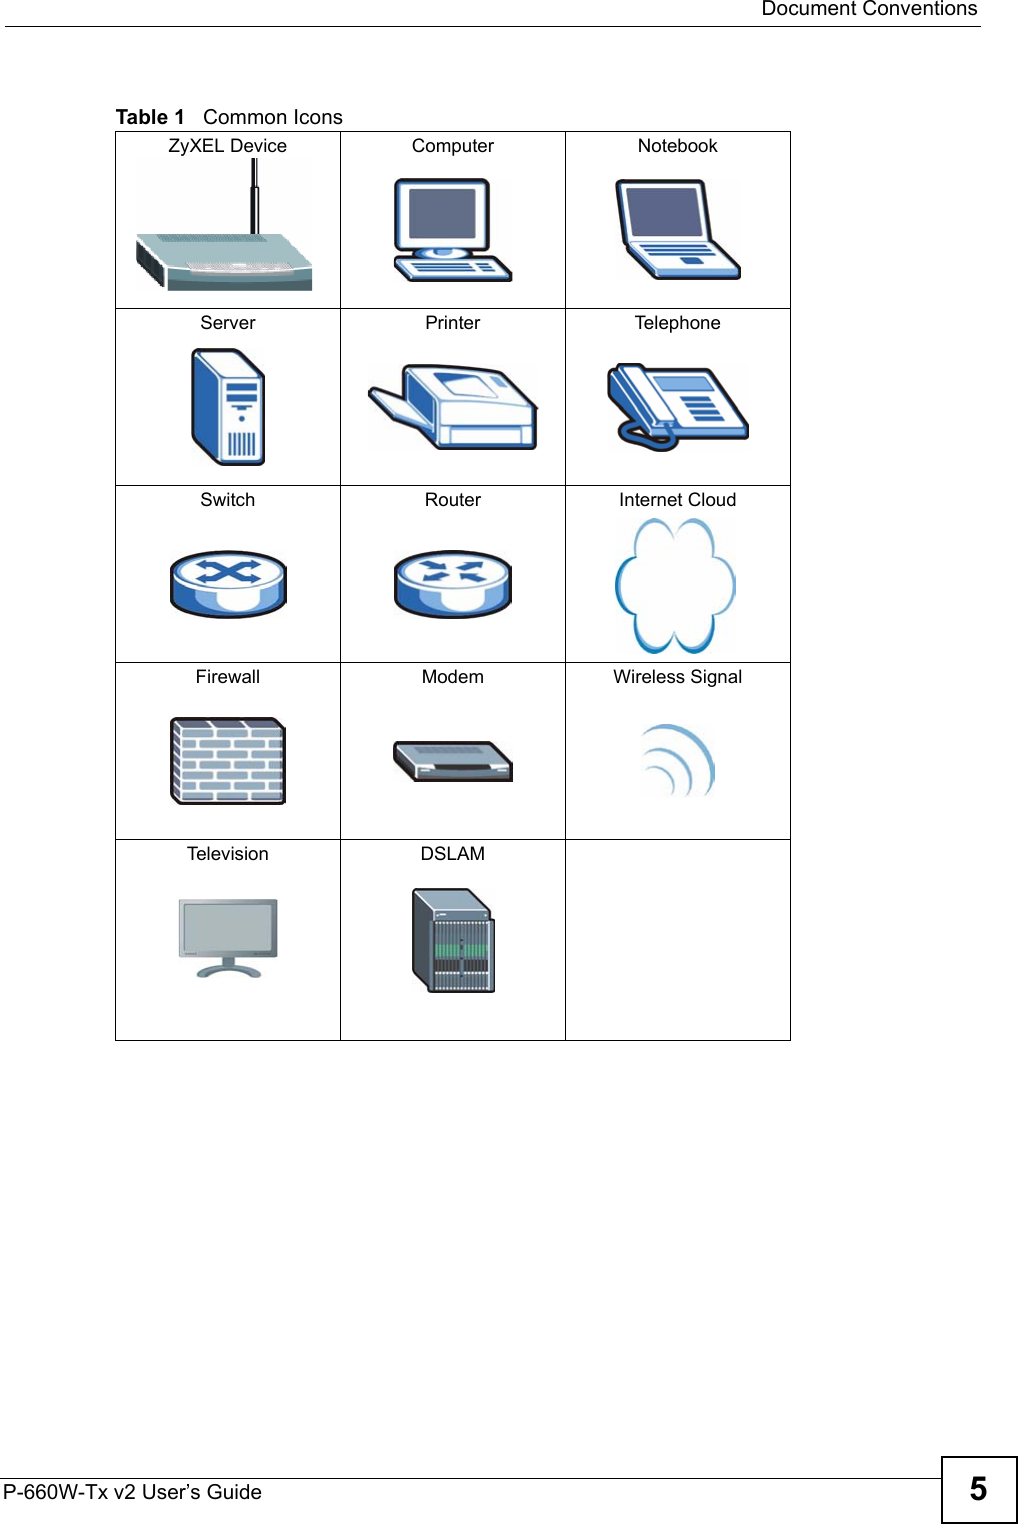  Document ConventionsP-660W-Tx v2 User’s Guide 5Table 1   Common IconsZyXEL Device Computer NotebookServer Printer TelephoneSwitch Router Internet CloudFirewall Modem Wireless SignalTelevision DSLAM